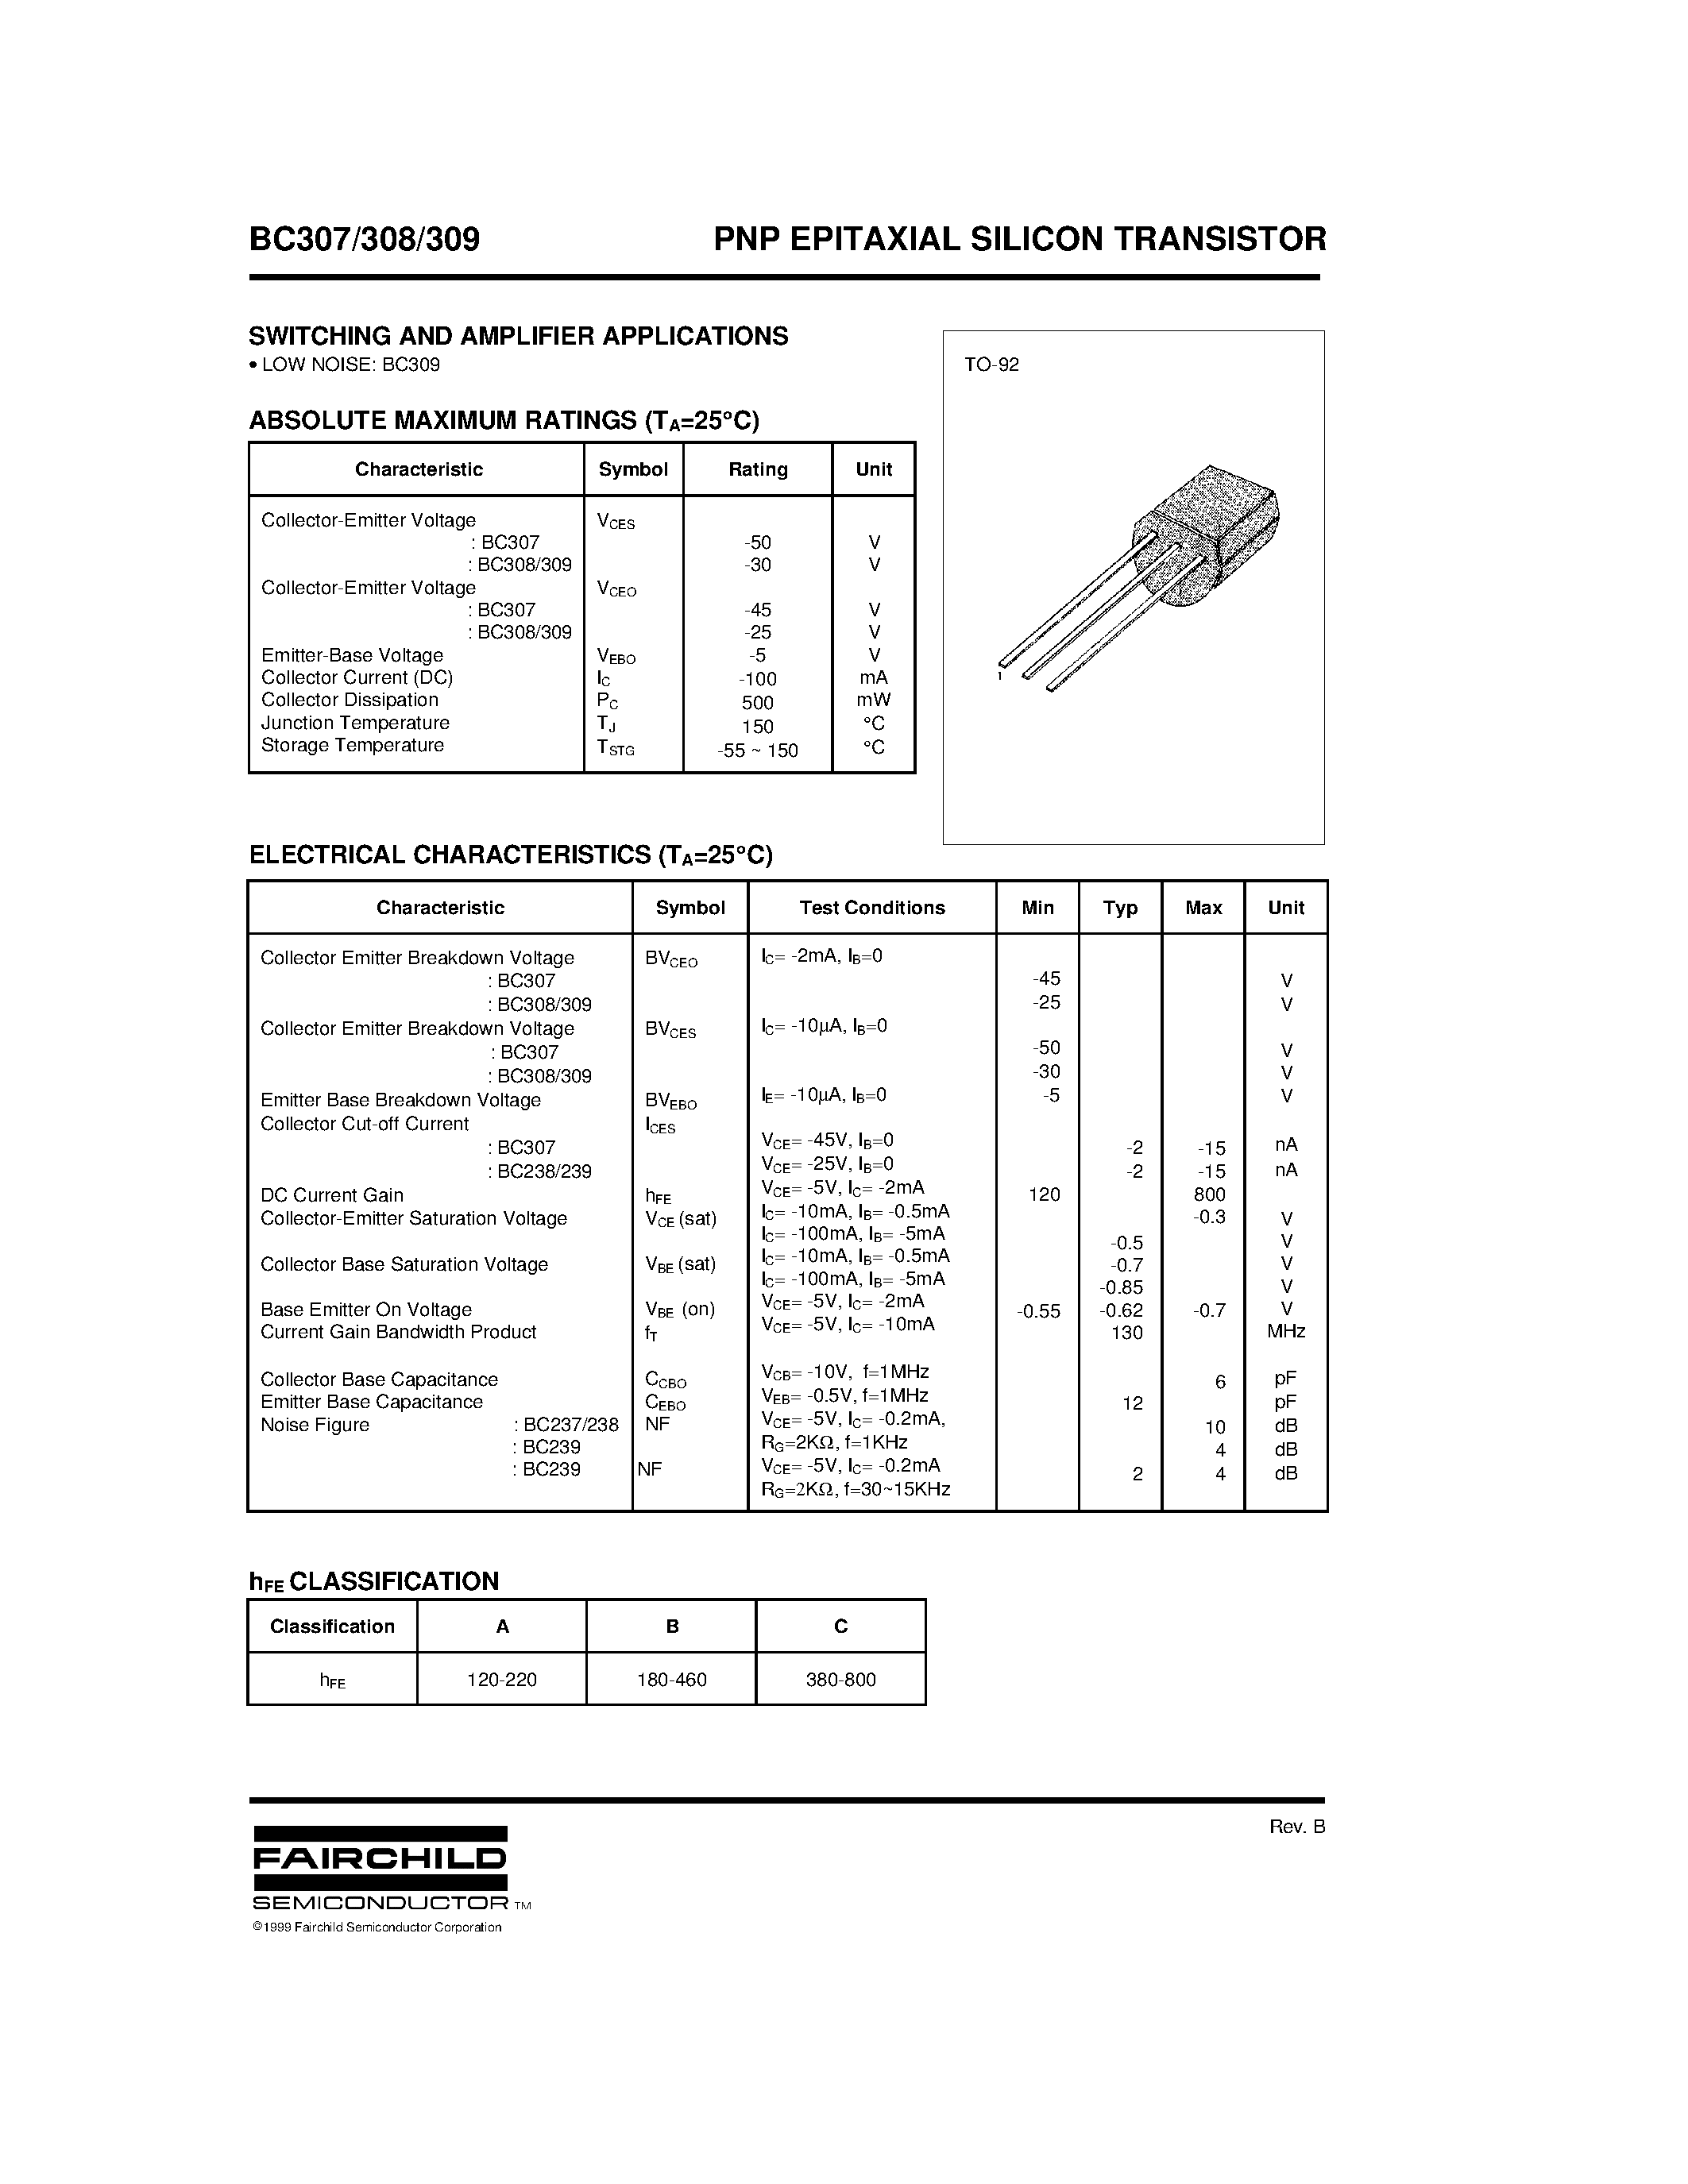 Datasheet BC307 - PNP EPITAXIAL SILICON TRANSISTOR page 1